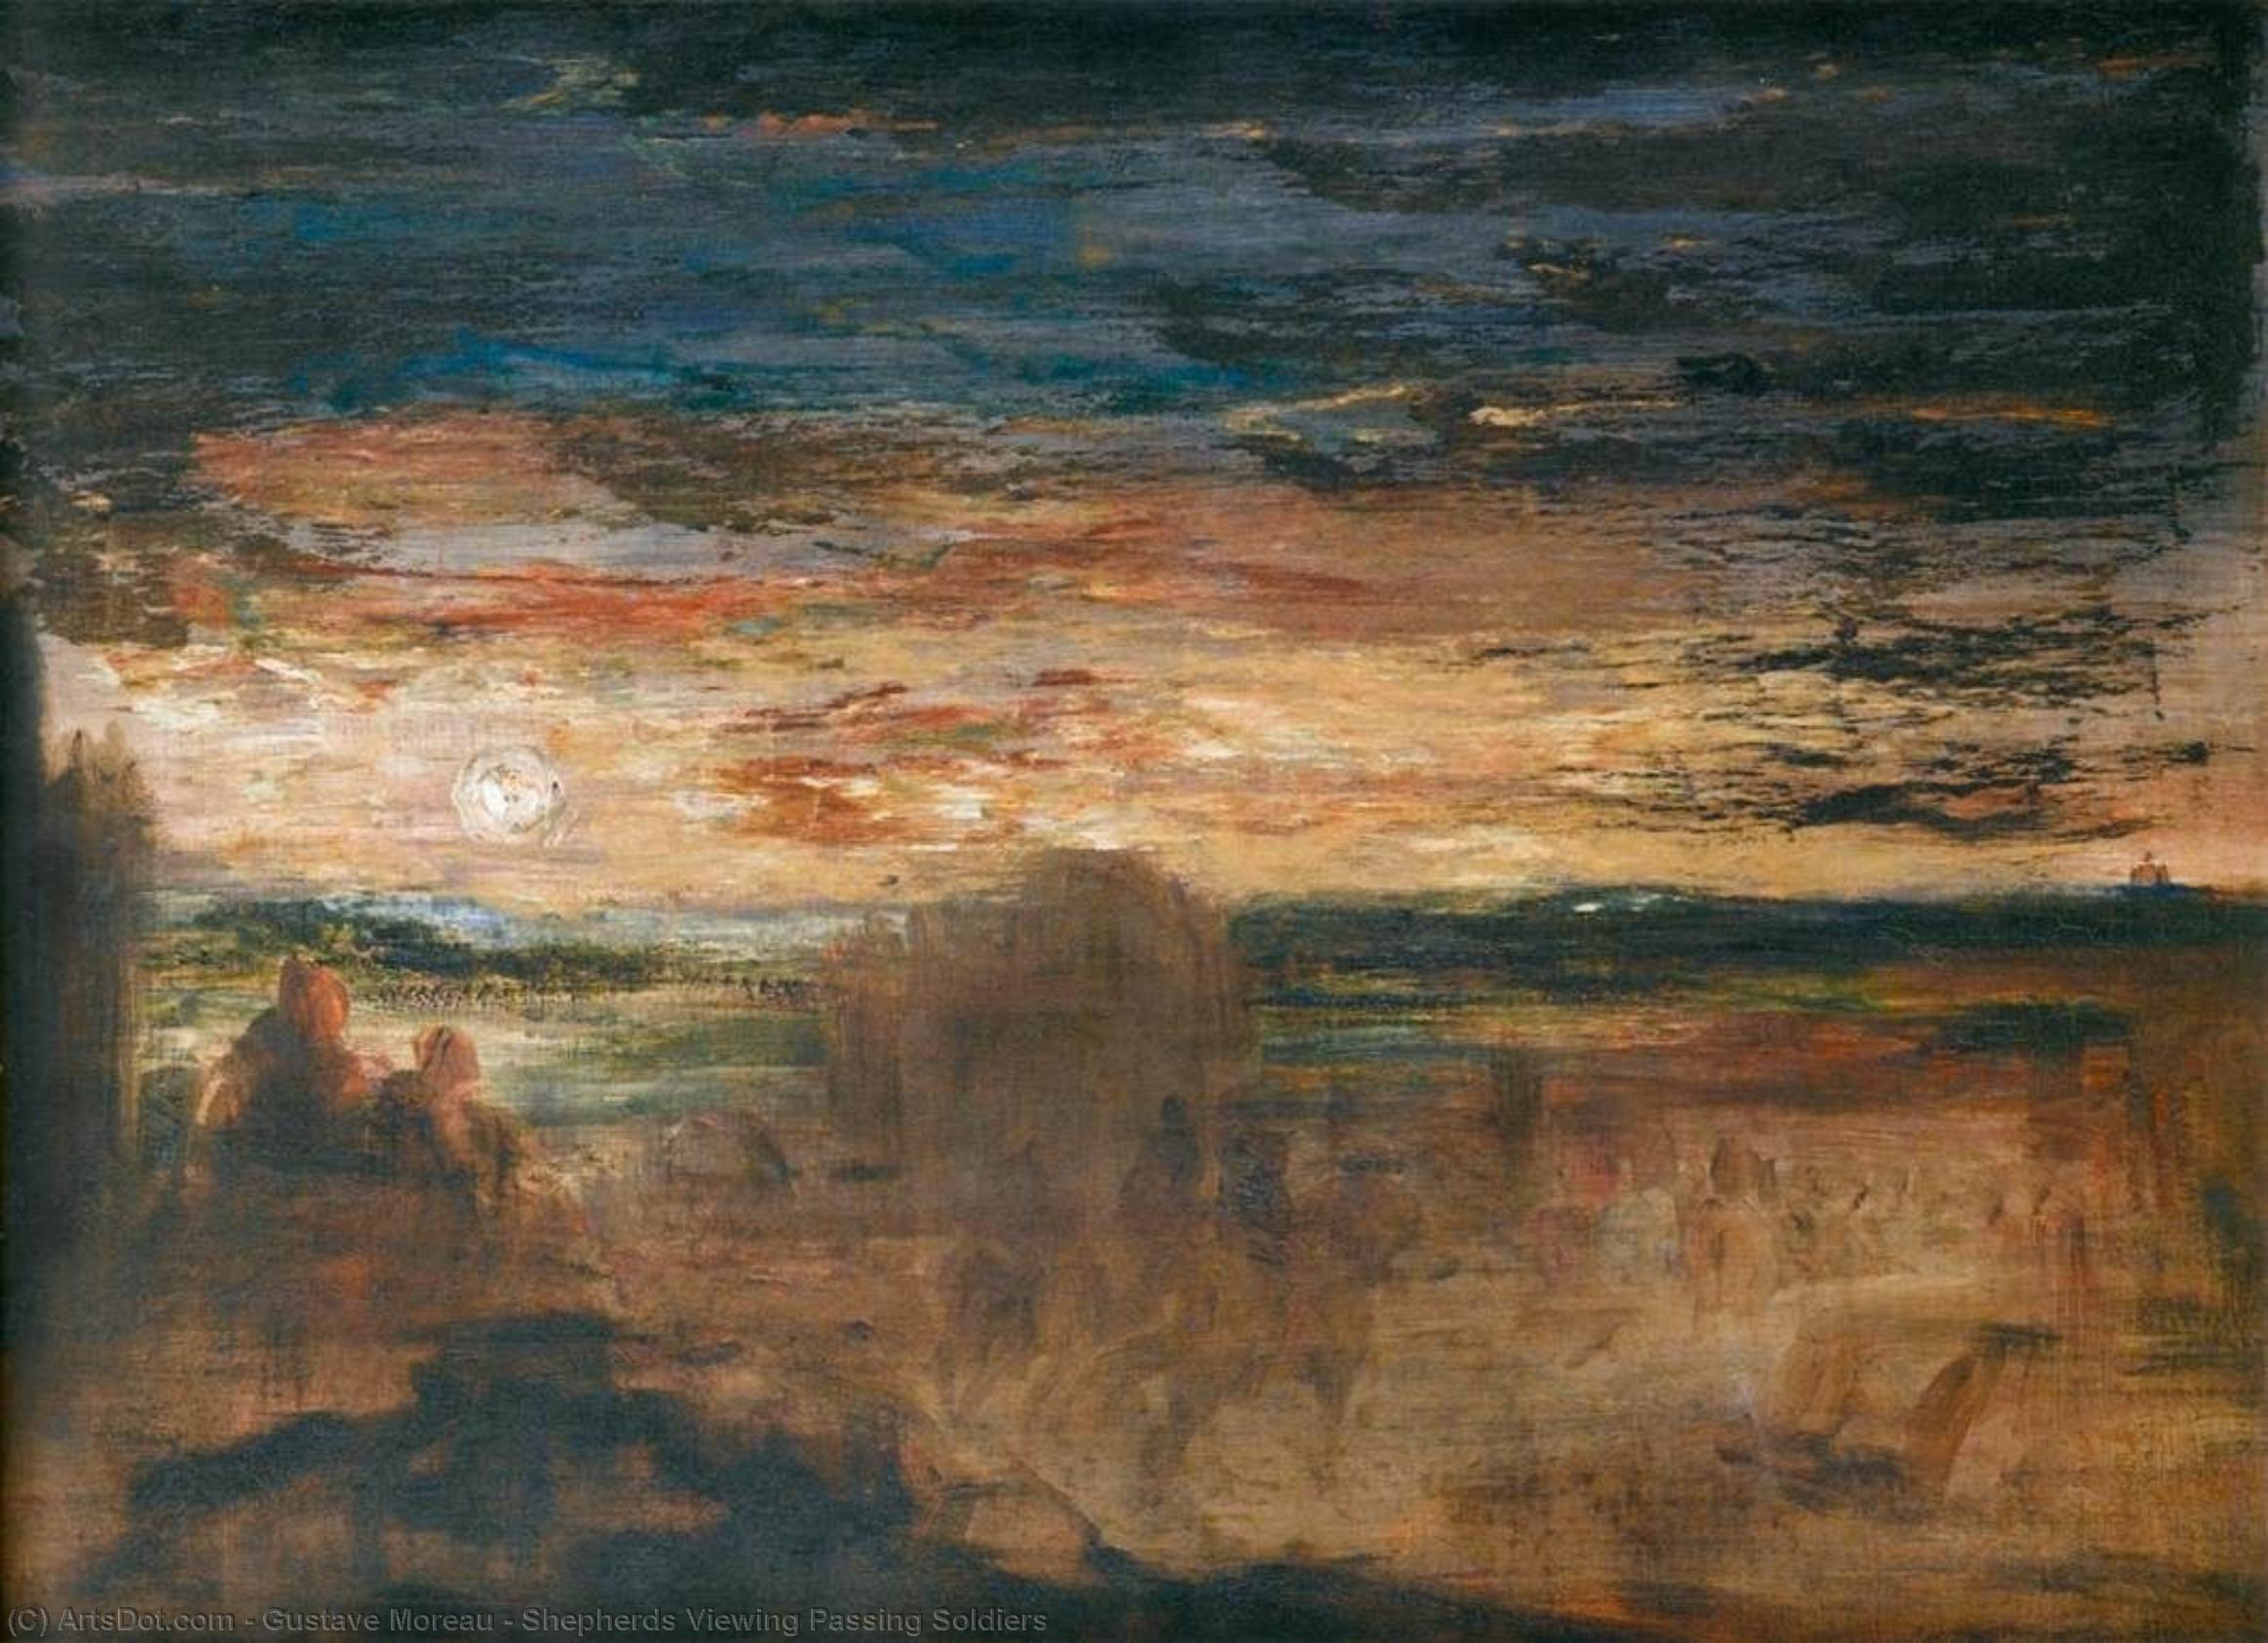 WikiOO.org - 백과 사전 - 회화, 삽화 Gustave Moreau - Shepherds Viewing Passing Soldiers